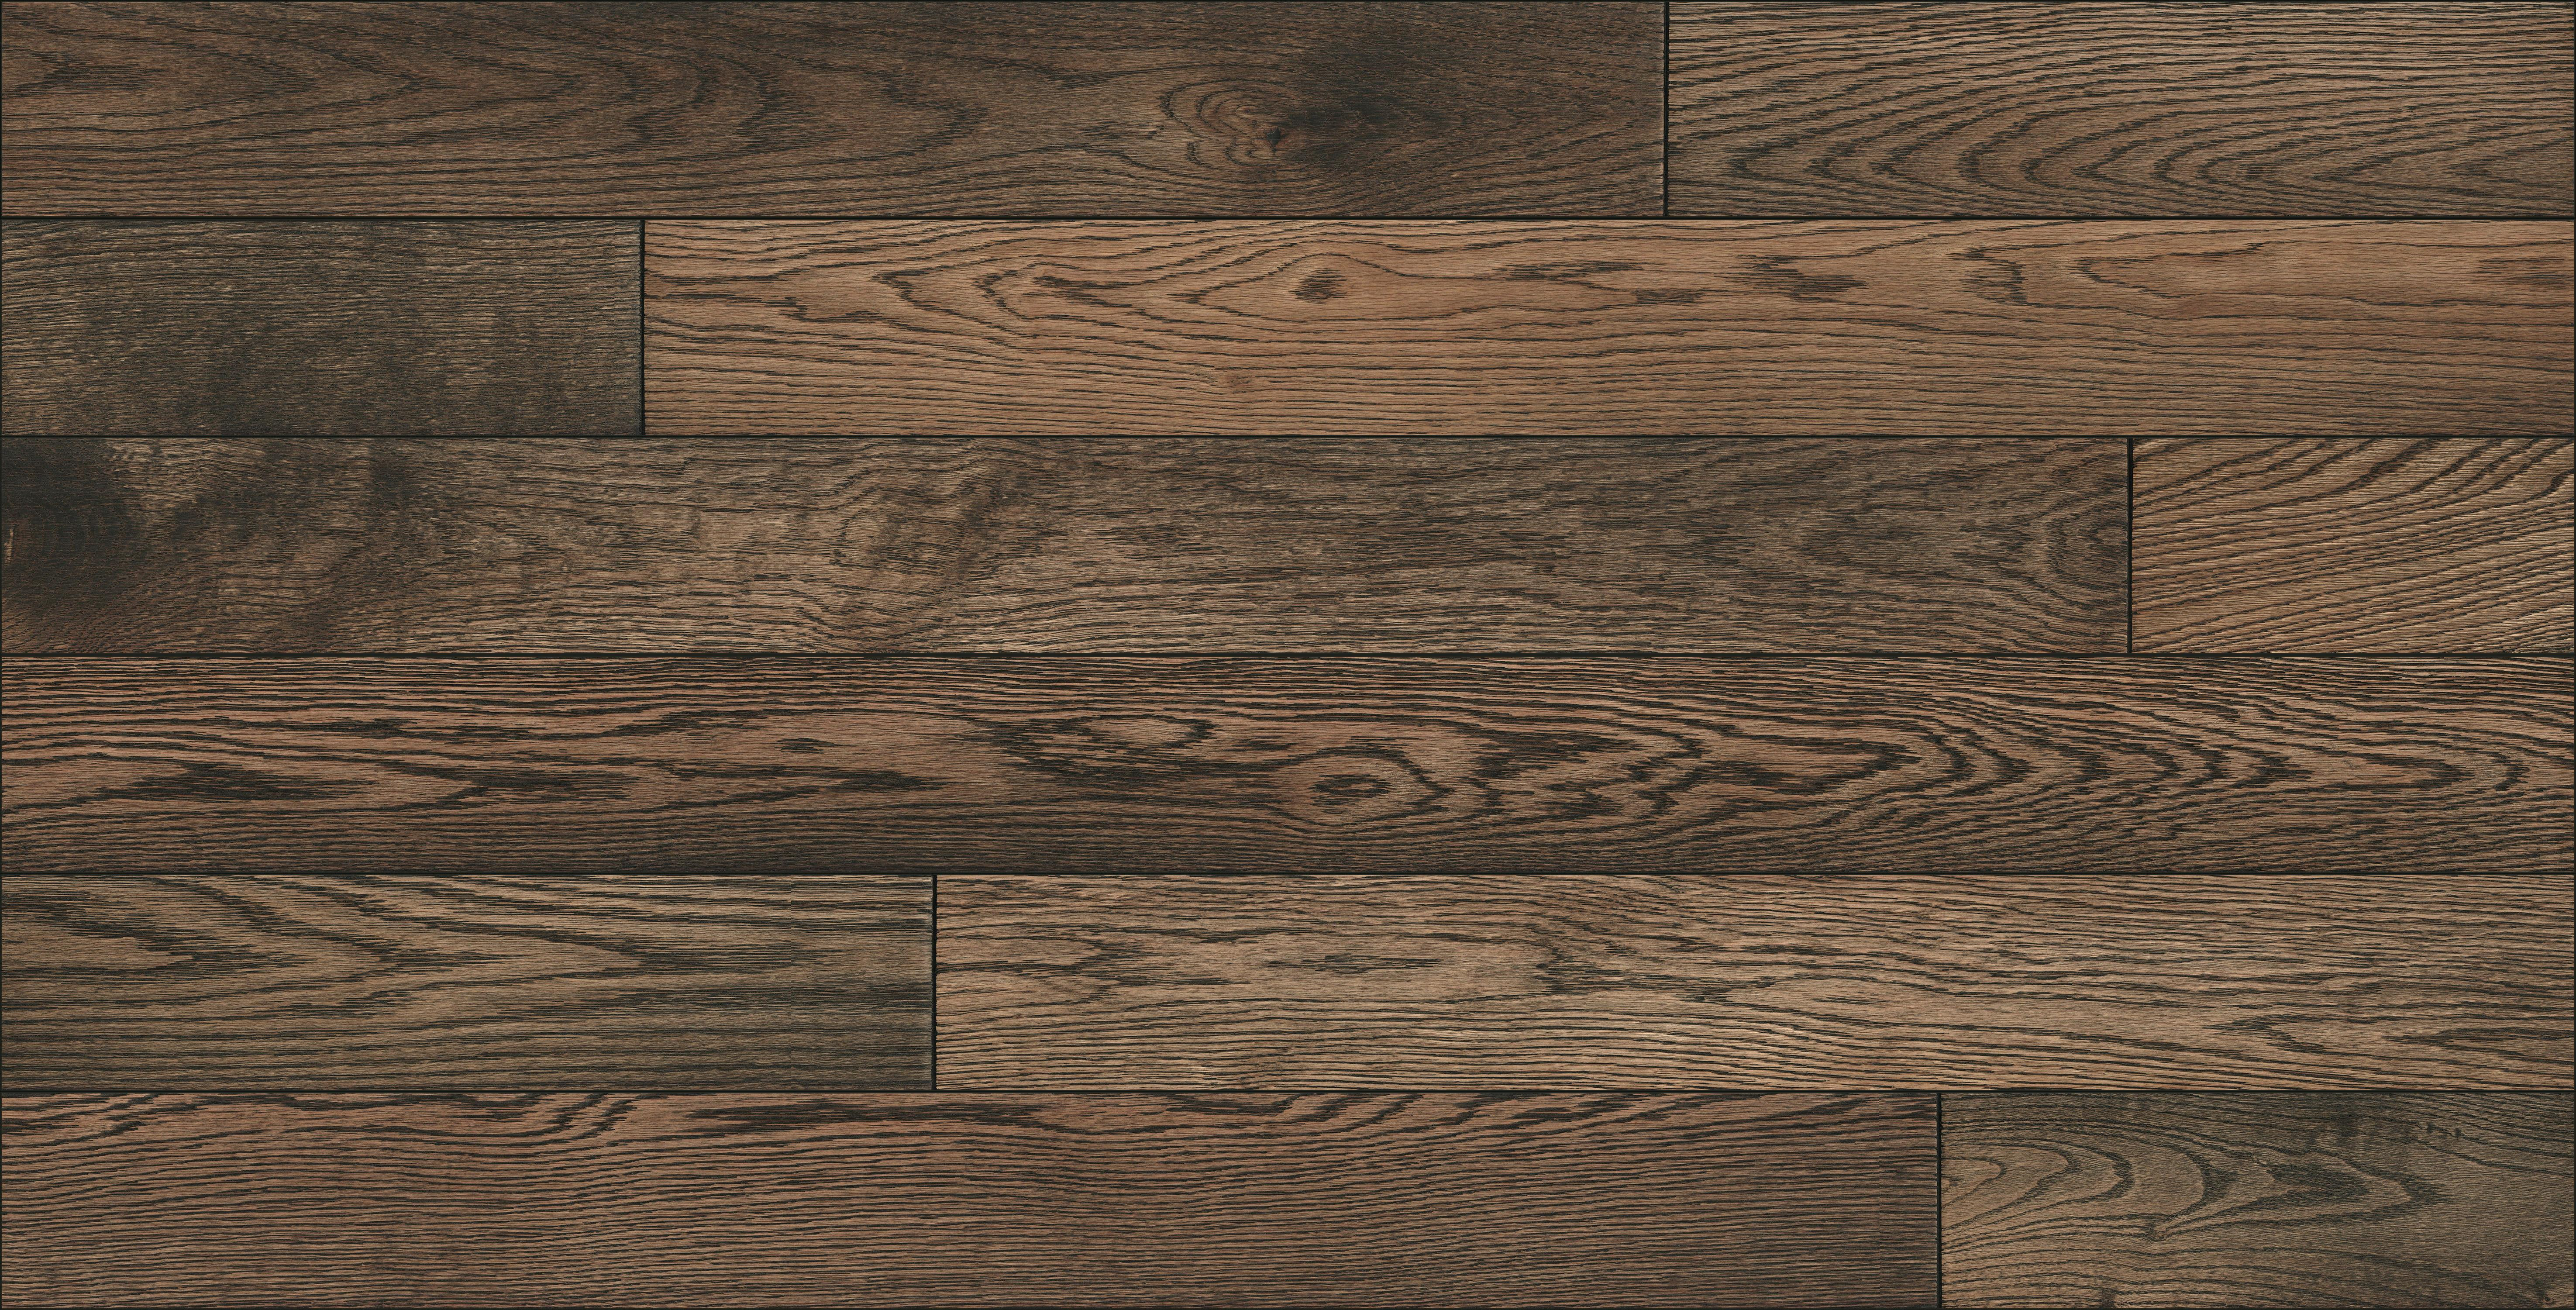 10 Recommended Hardwood Flooring Faq 2024 free download hardwood flooring faq of solid wood flooring on sale new where to buy hardwood flooring with regard to solid wood flooring on sale elegant timber hardwood wheat 5 wide solid hardwood floorin